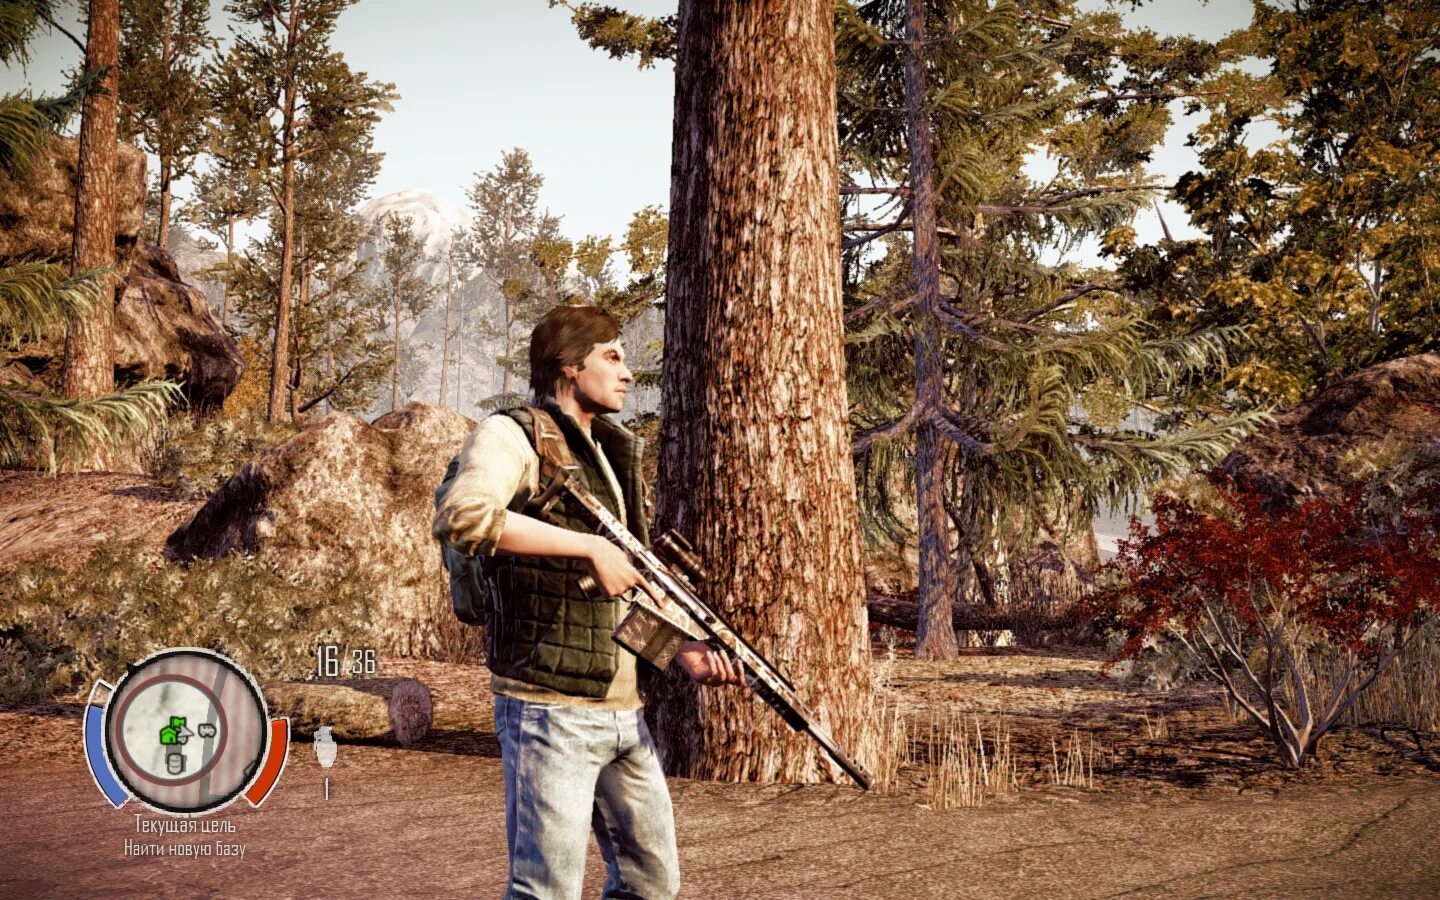 State of decay требования. State of Decay 2. State of Decay 1 оружие. State of Decay 2 все оружие. State of Decay 1 all Guns.